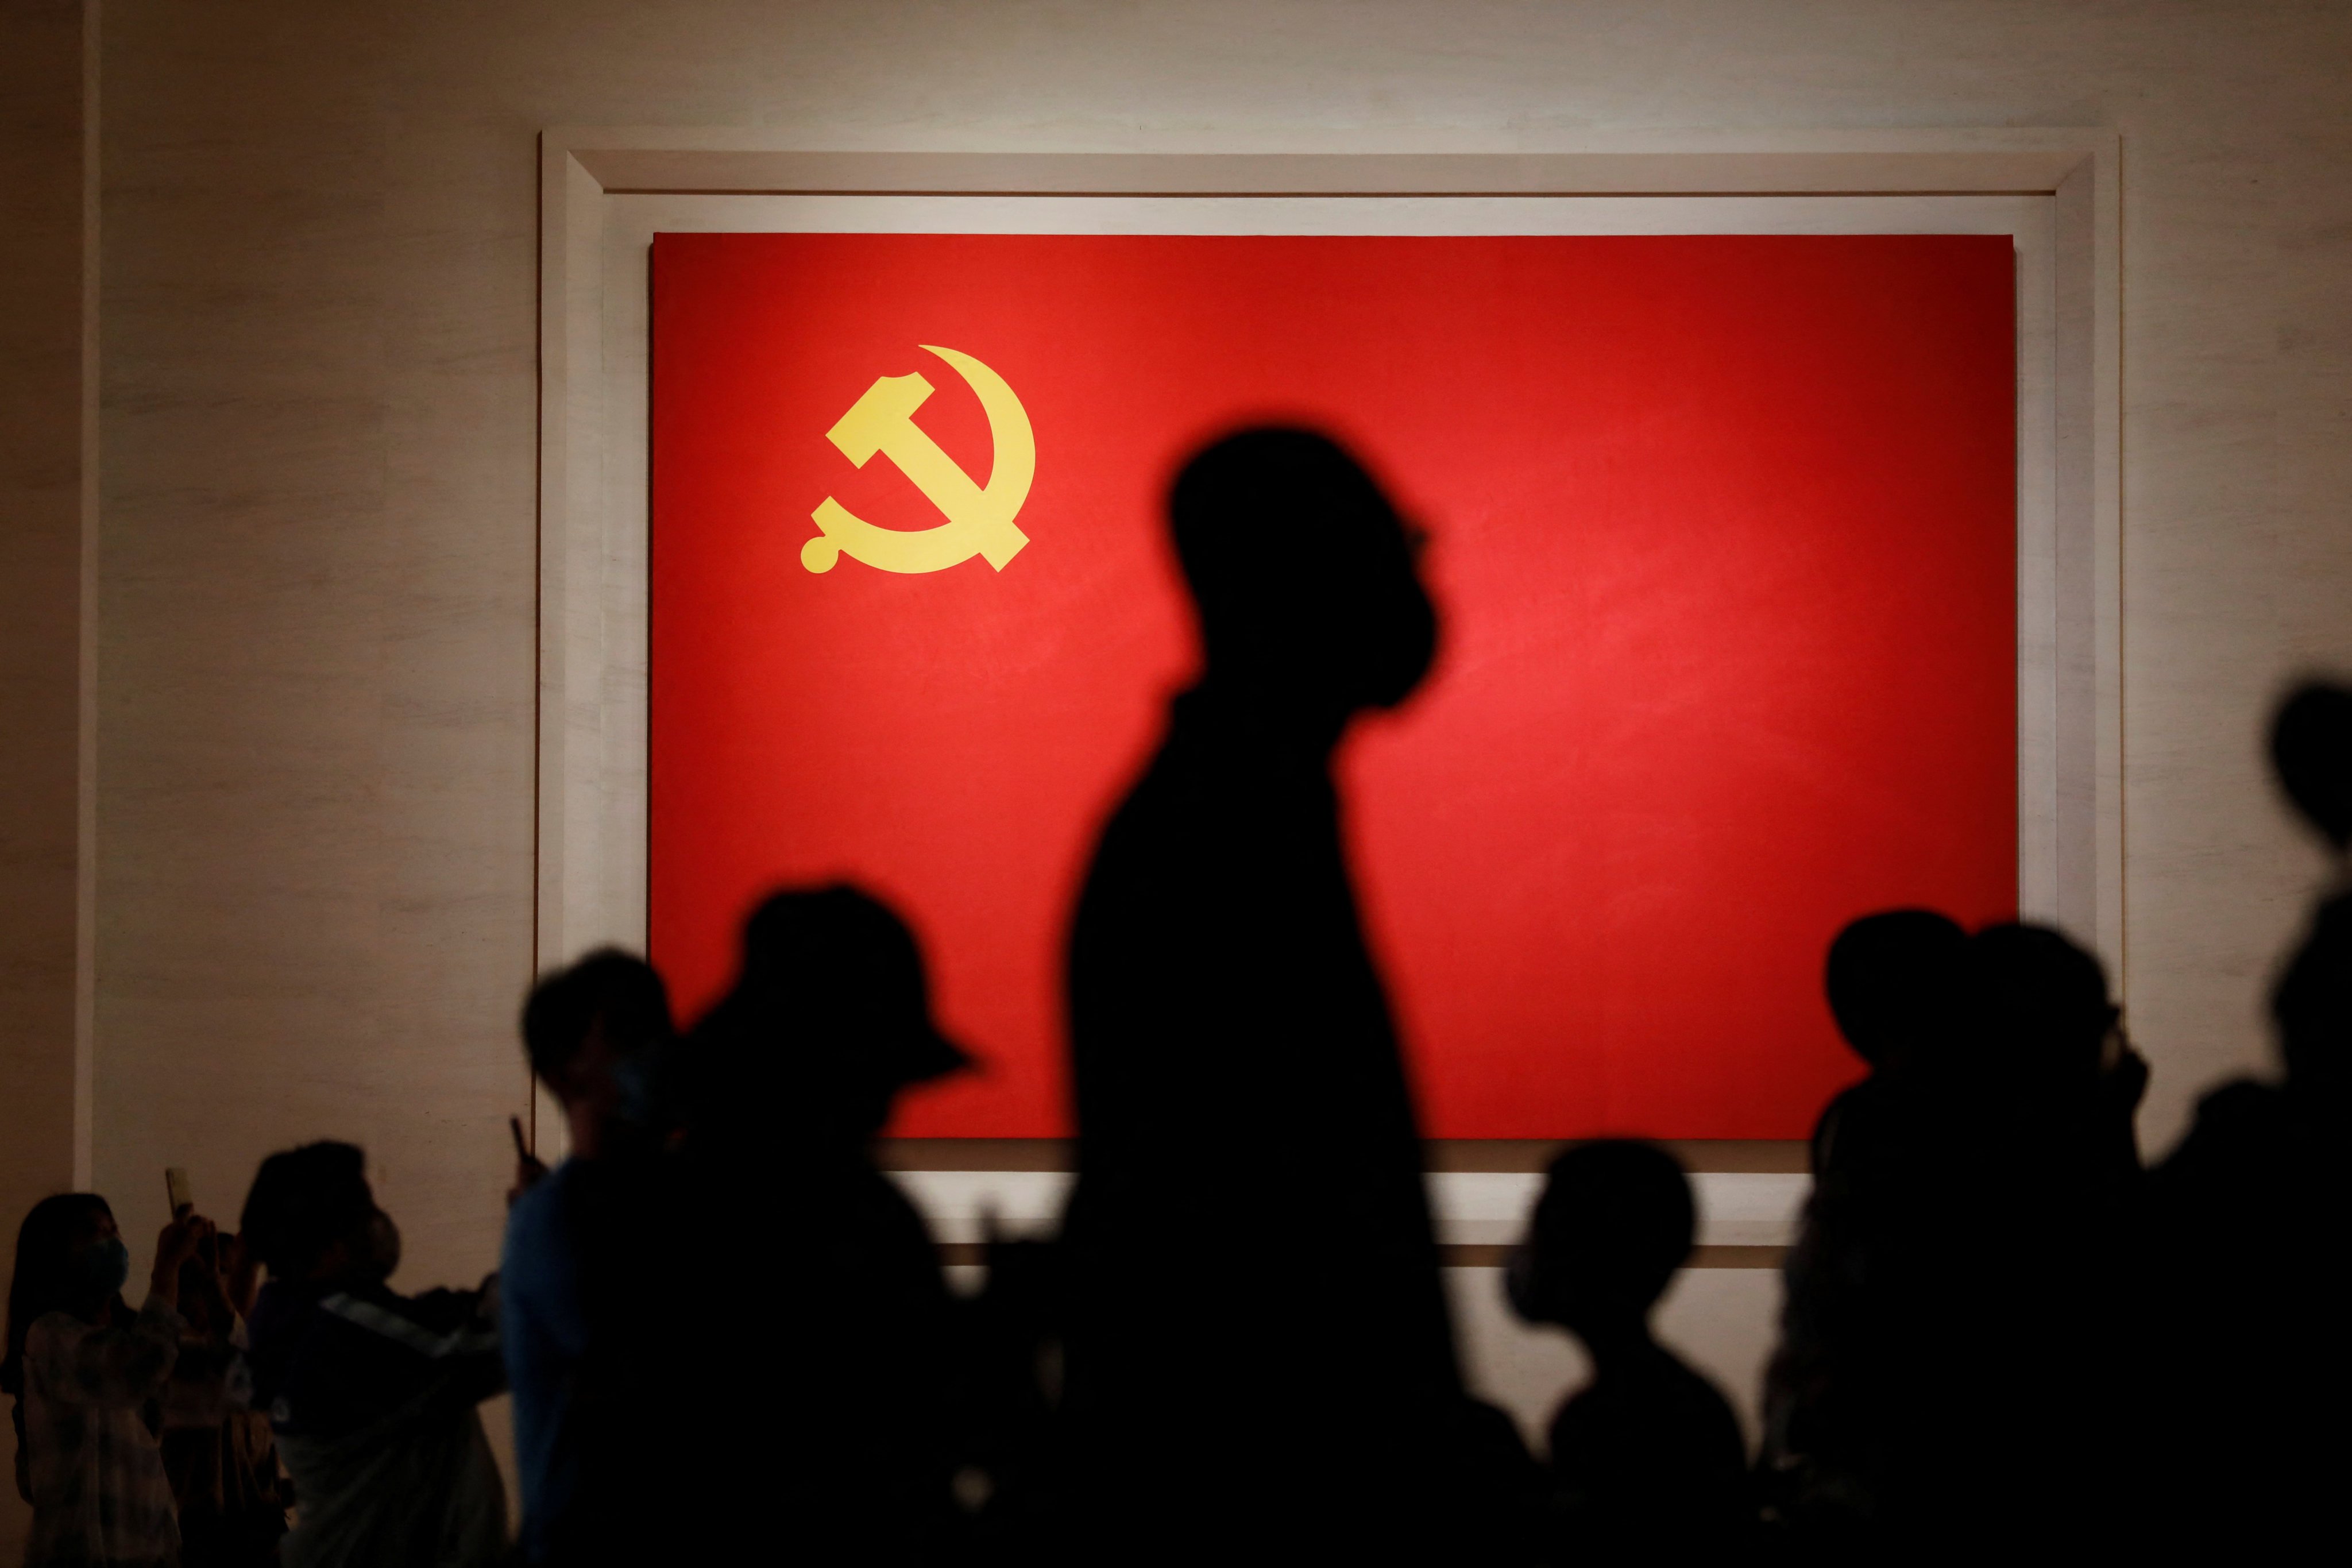 Several senior officials netted in China’s anti-corruption campaign have been accused of forming intra-party “political cliques”. Photo: Reuters